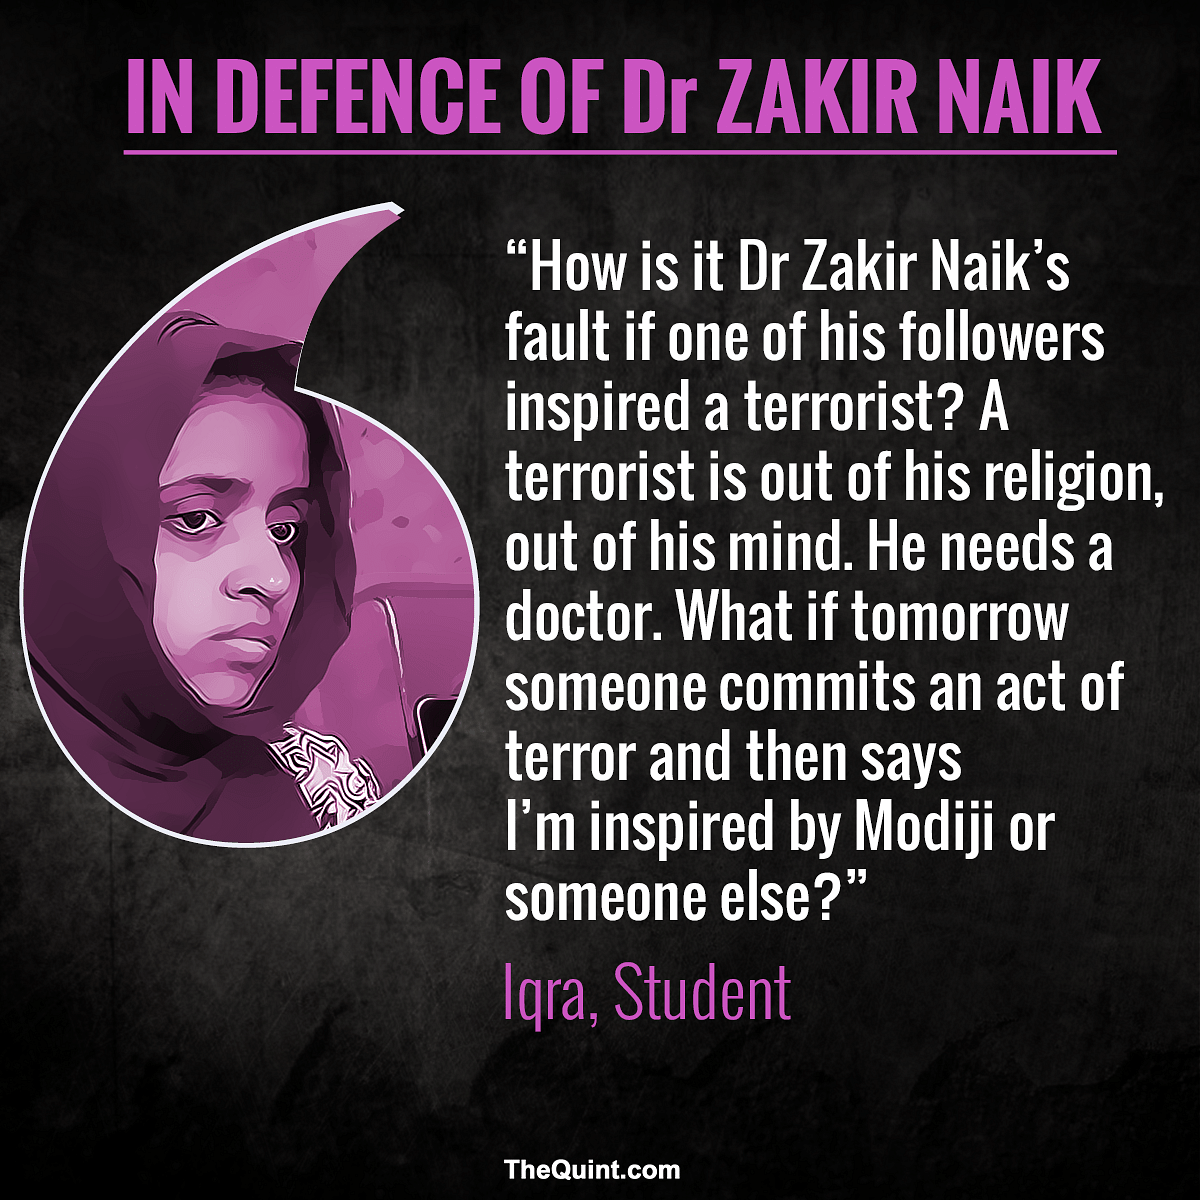 What makes Dr Zakir Naik tick? His young followers help us understand this modern-day preacher of old-world Islam.